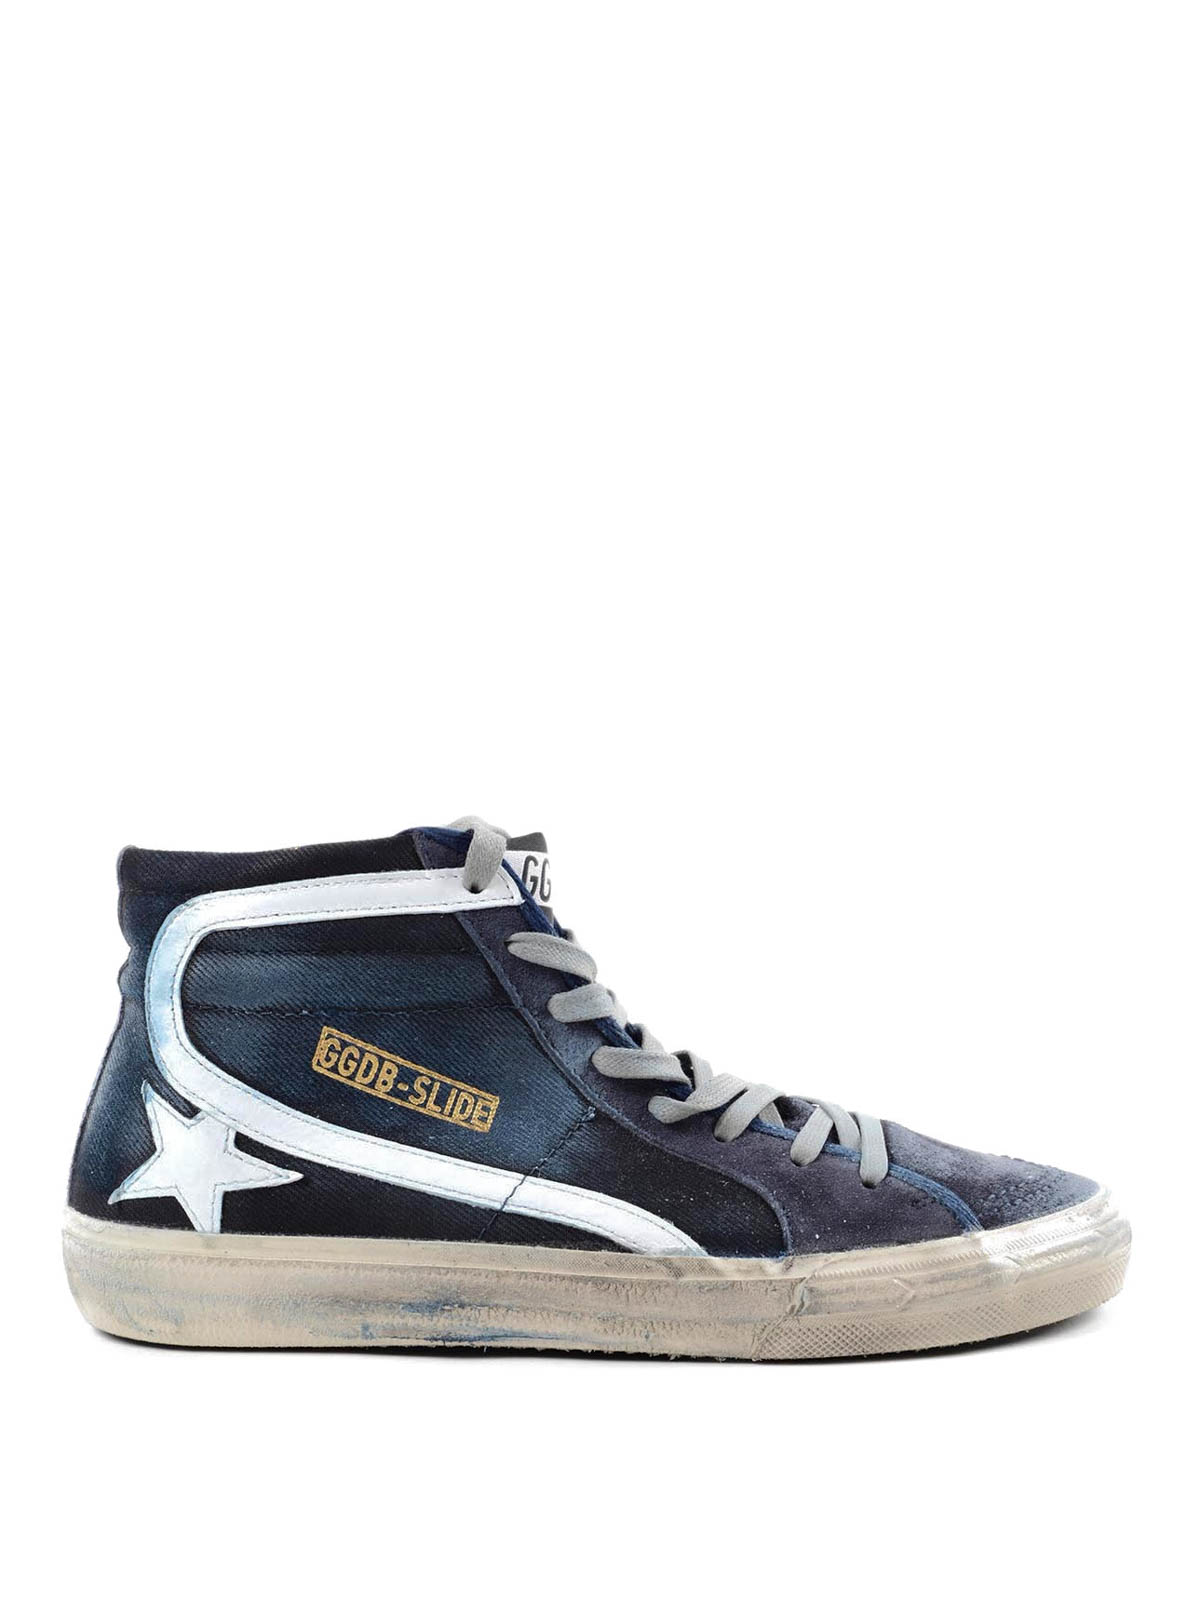 Trainers Golden Goose - Slide sneakers - G29WS595F52F52 | iKRIX.com